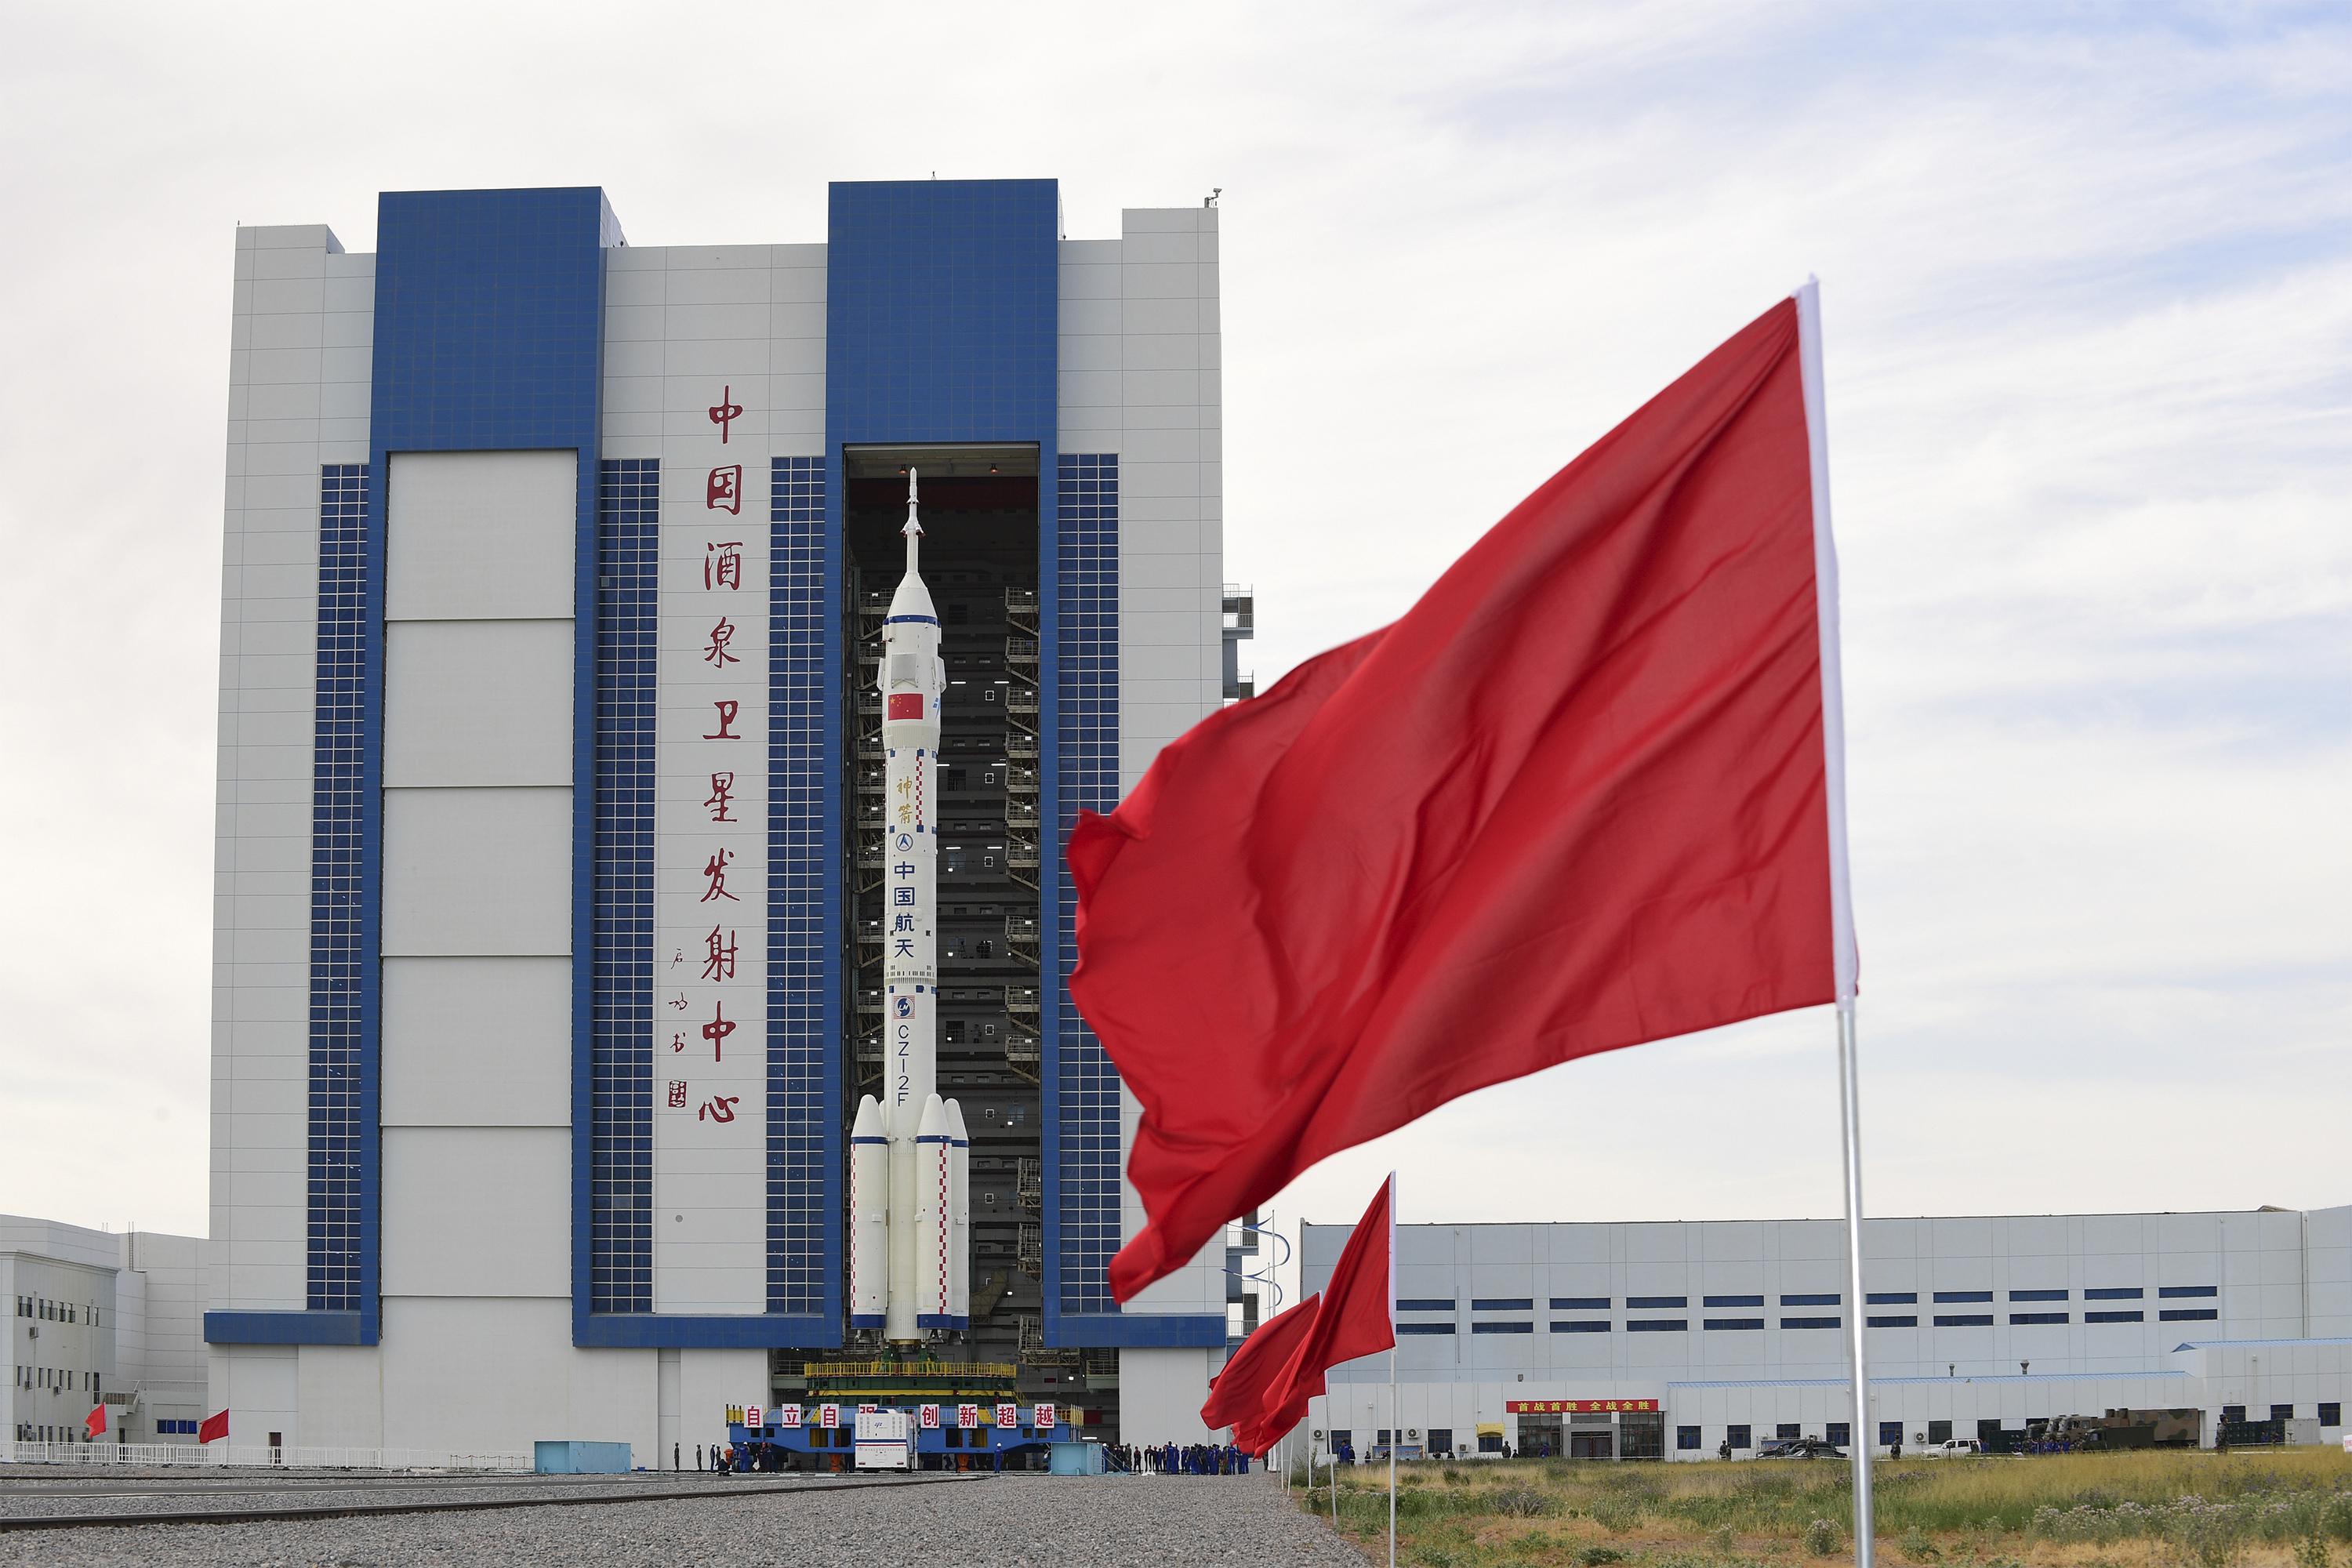 Rocket on pad, China ready to send 1st crew to space station - Associated Press